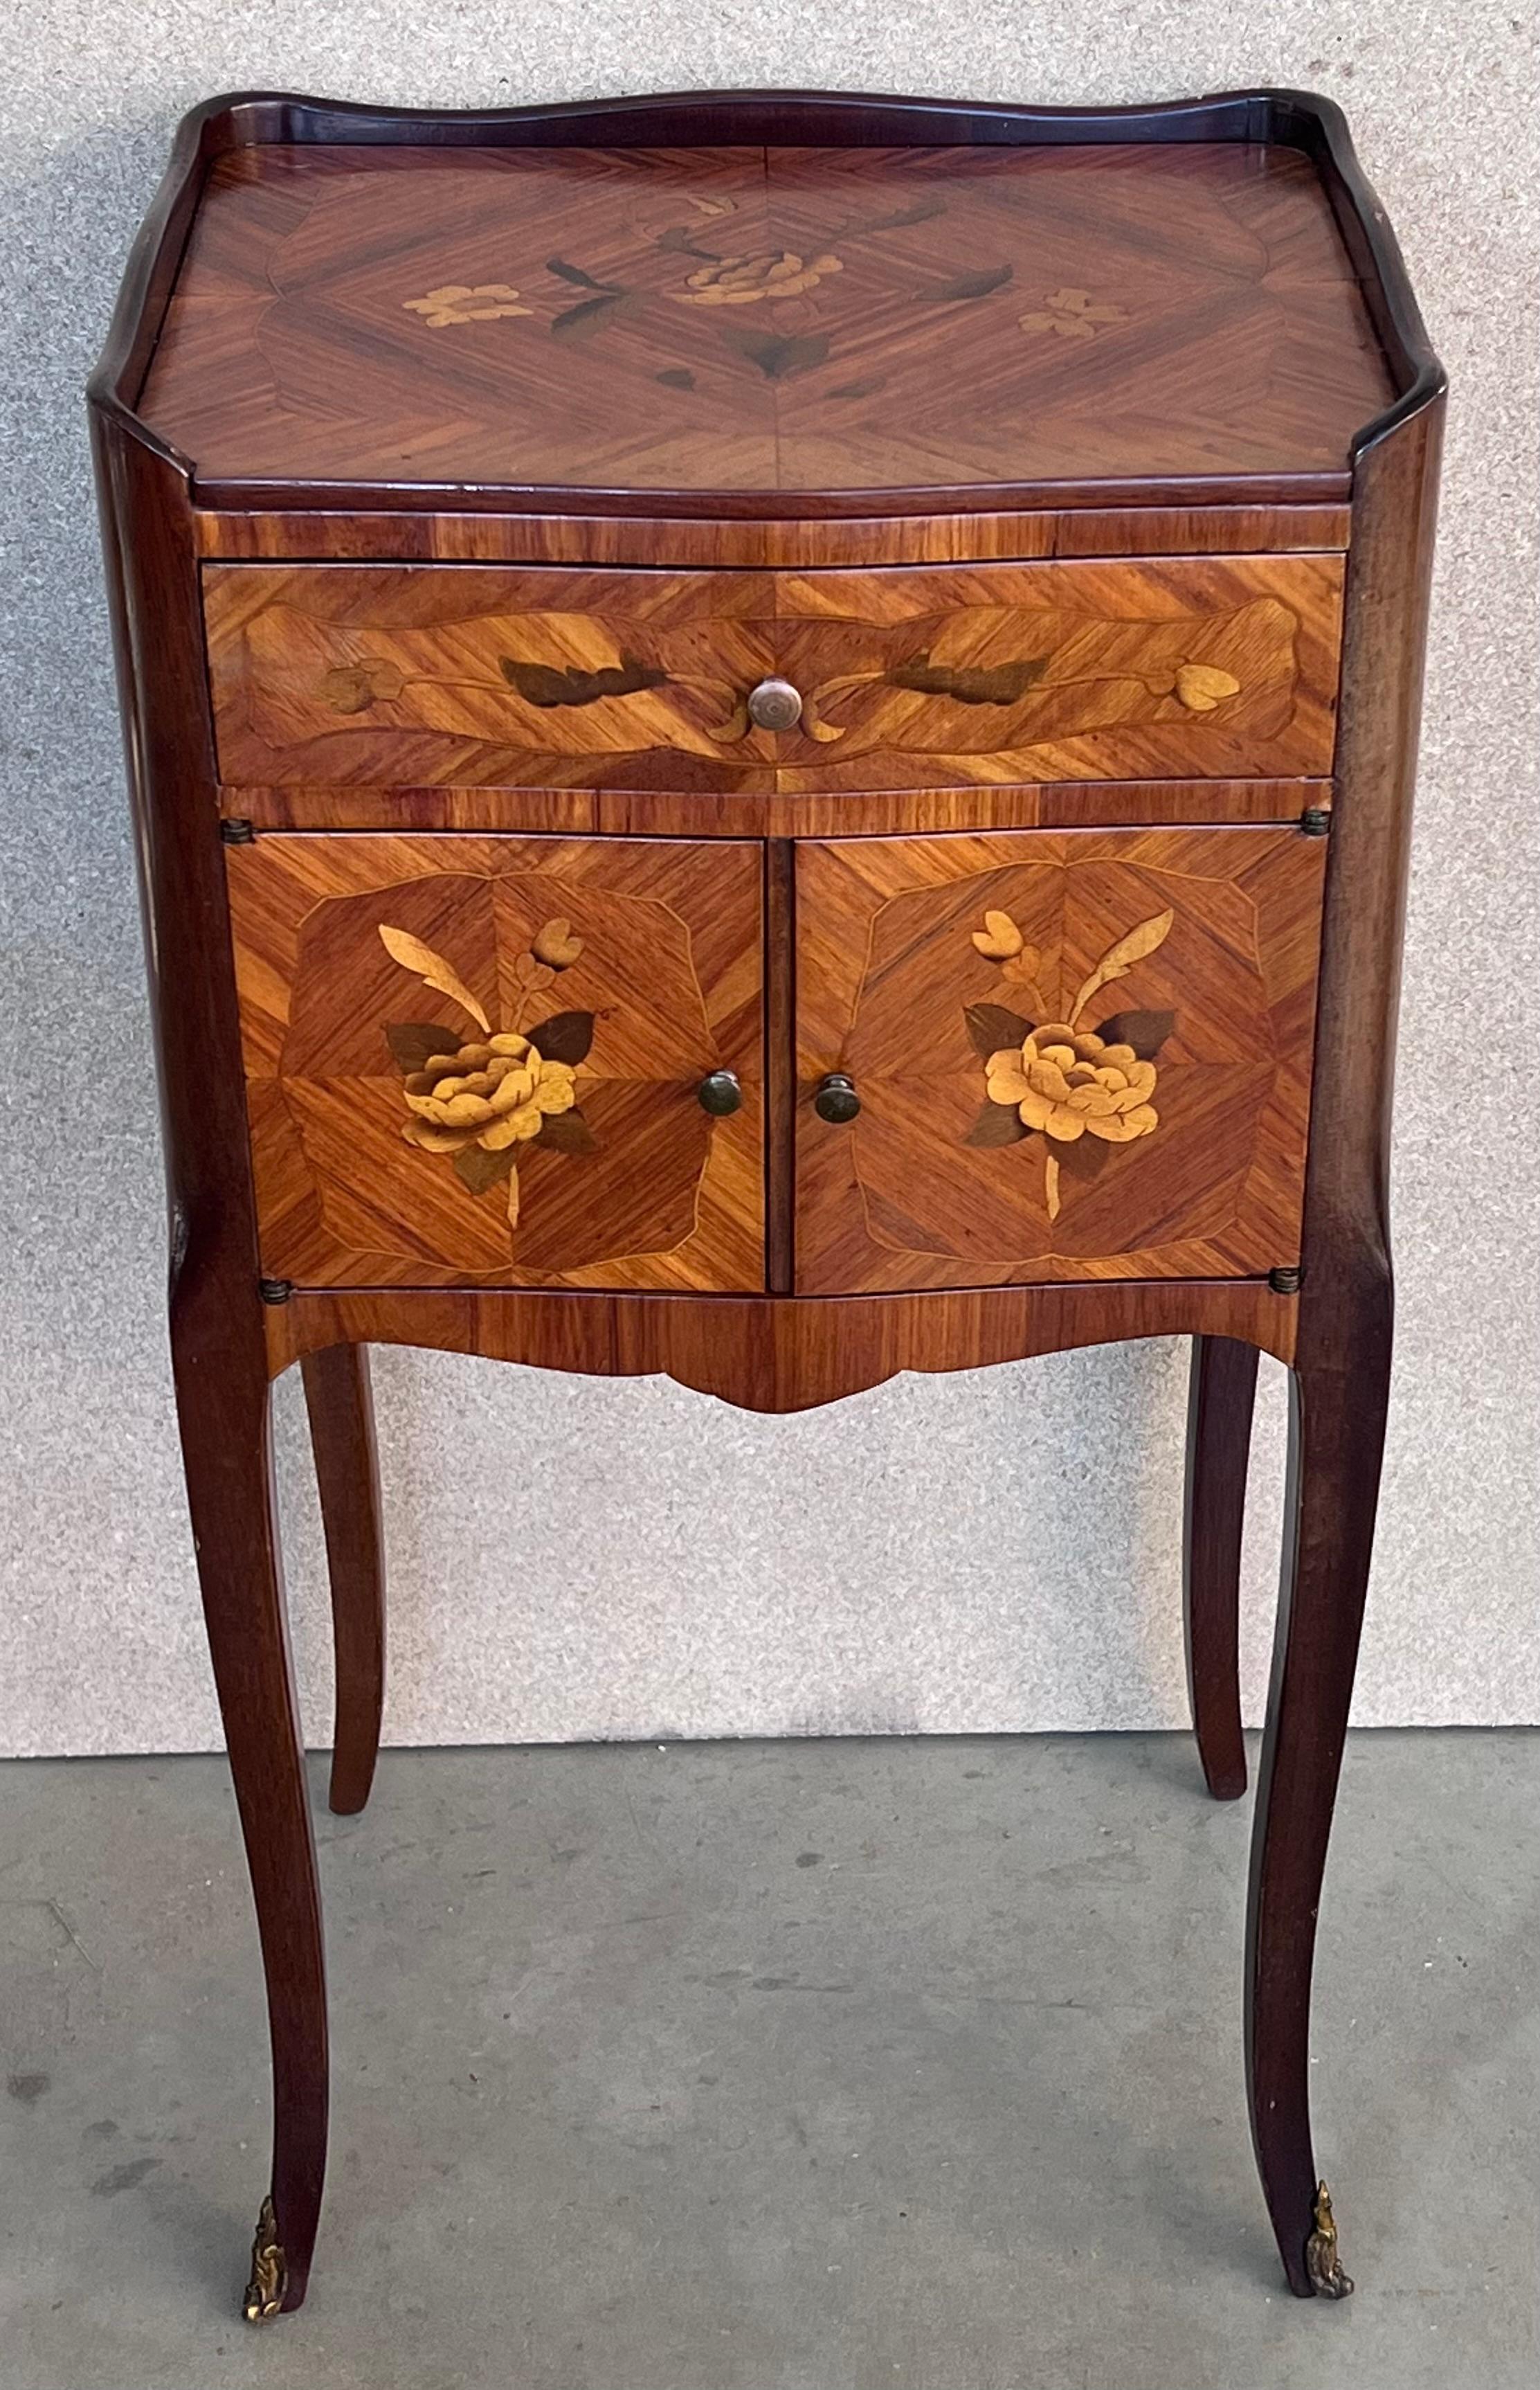 French Provincial Early 20th Century French Bedside Tables or Nightstands in Marquetry and Bronze